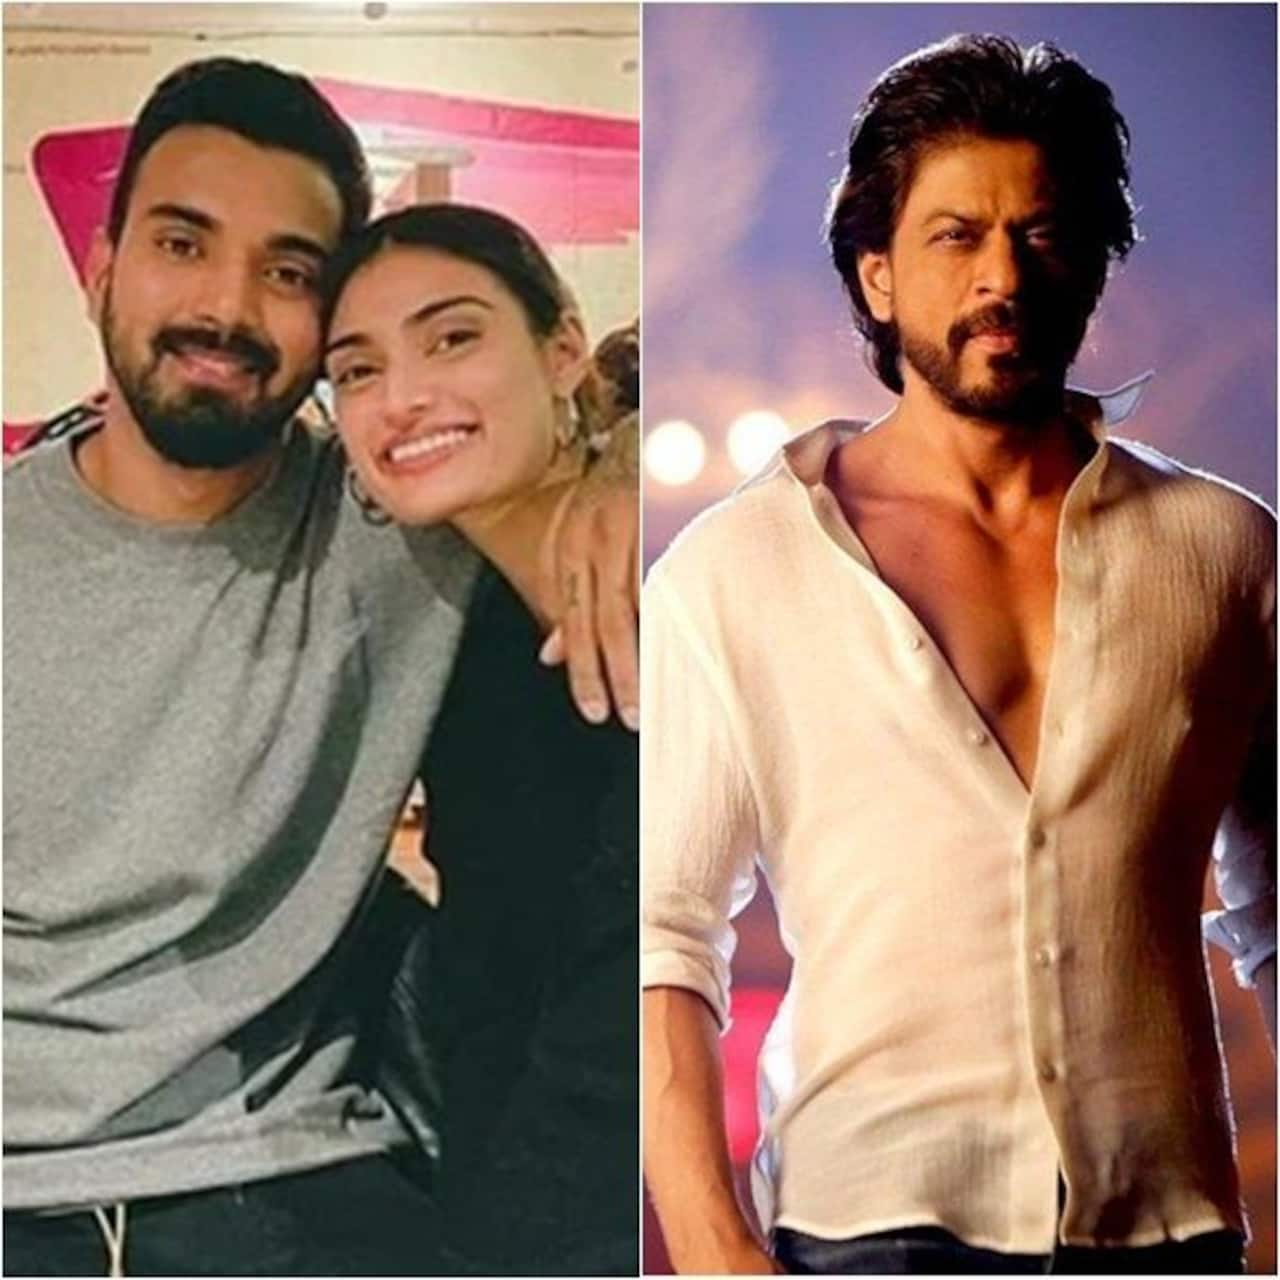 Trending Entertainment News Today: KL Rahul makes his relationship with Athiya Shetty official; Mahesh Manjrekar criticizes Shah Rukh Khan and more